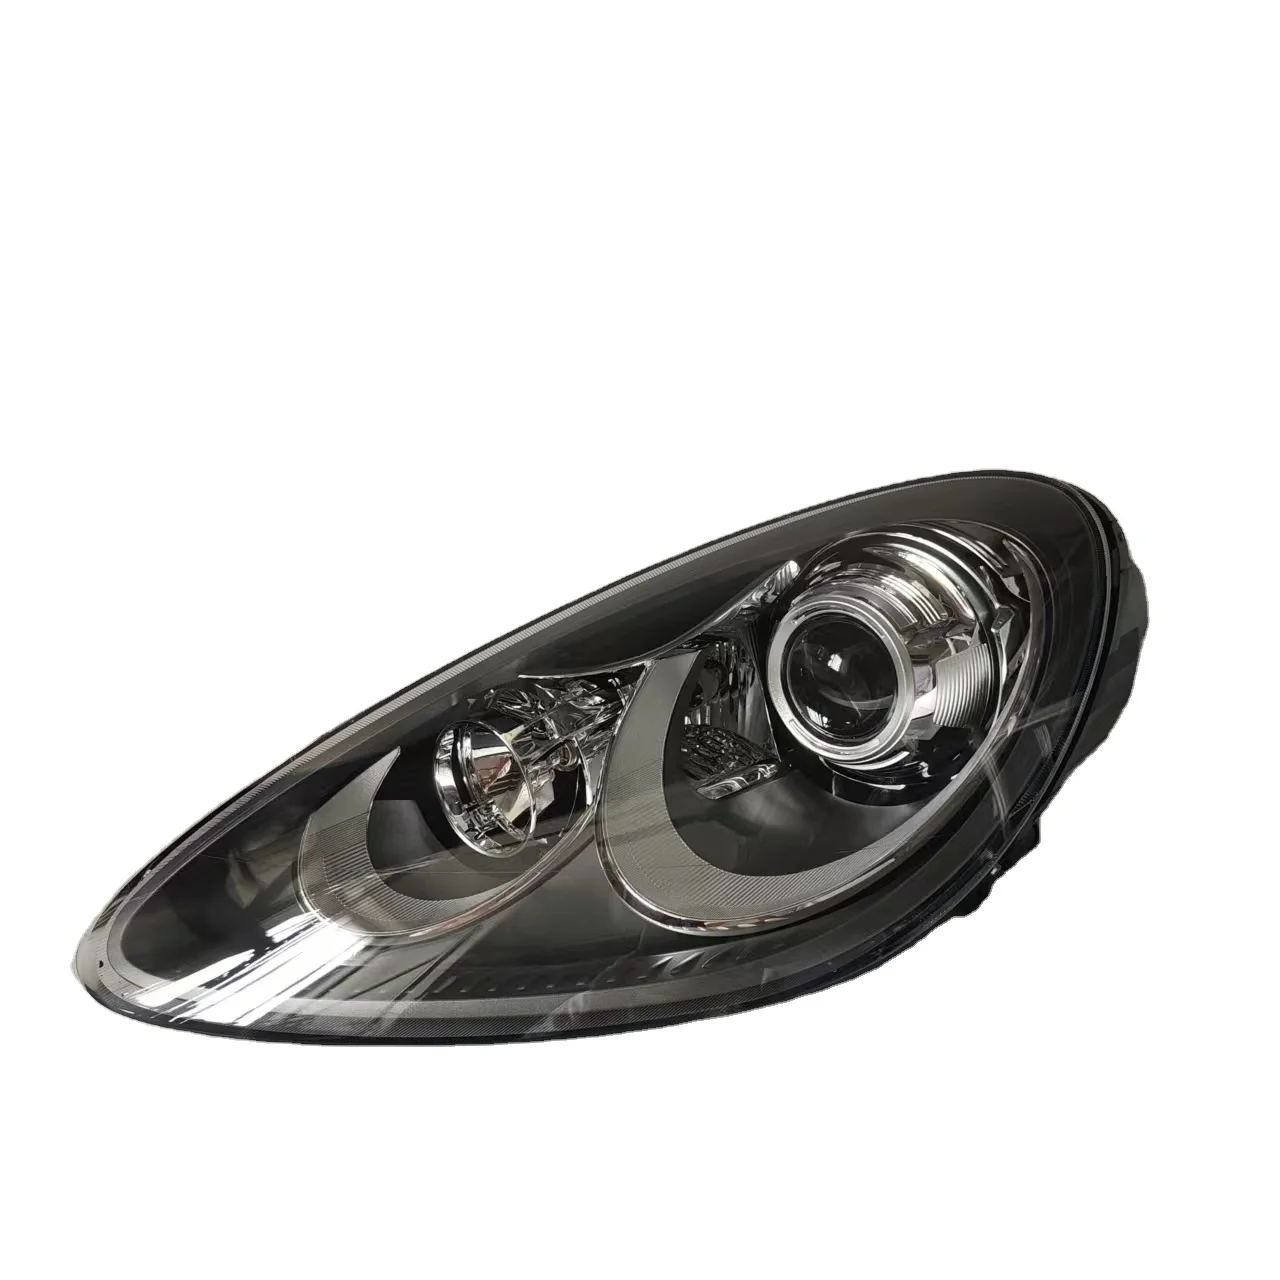 

For Porsche Cayenne 12 year high quality hernia auto parts lighting system headlights